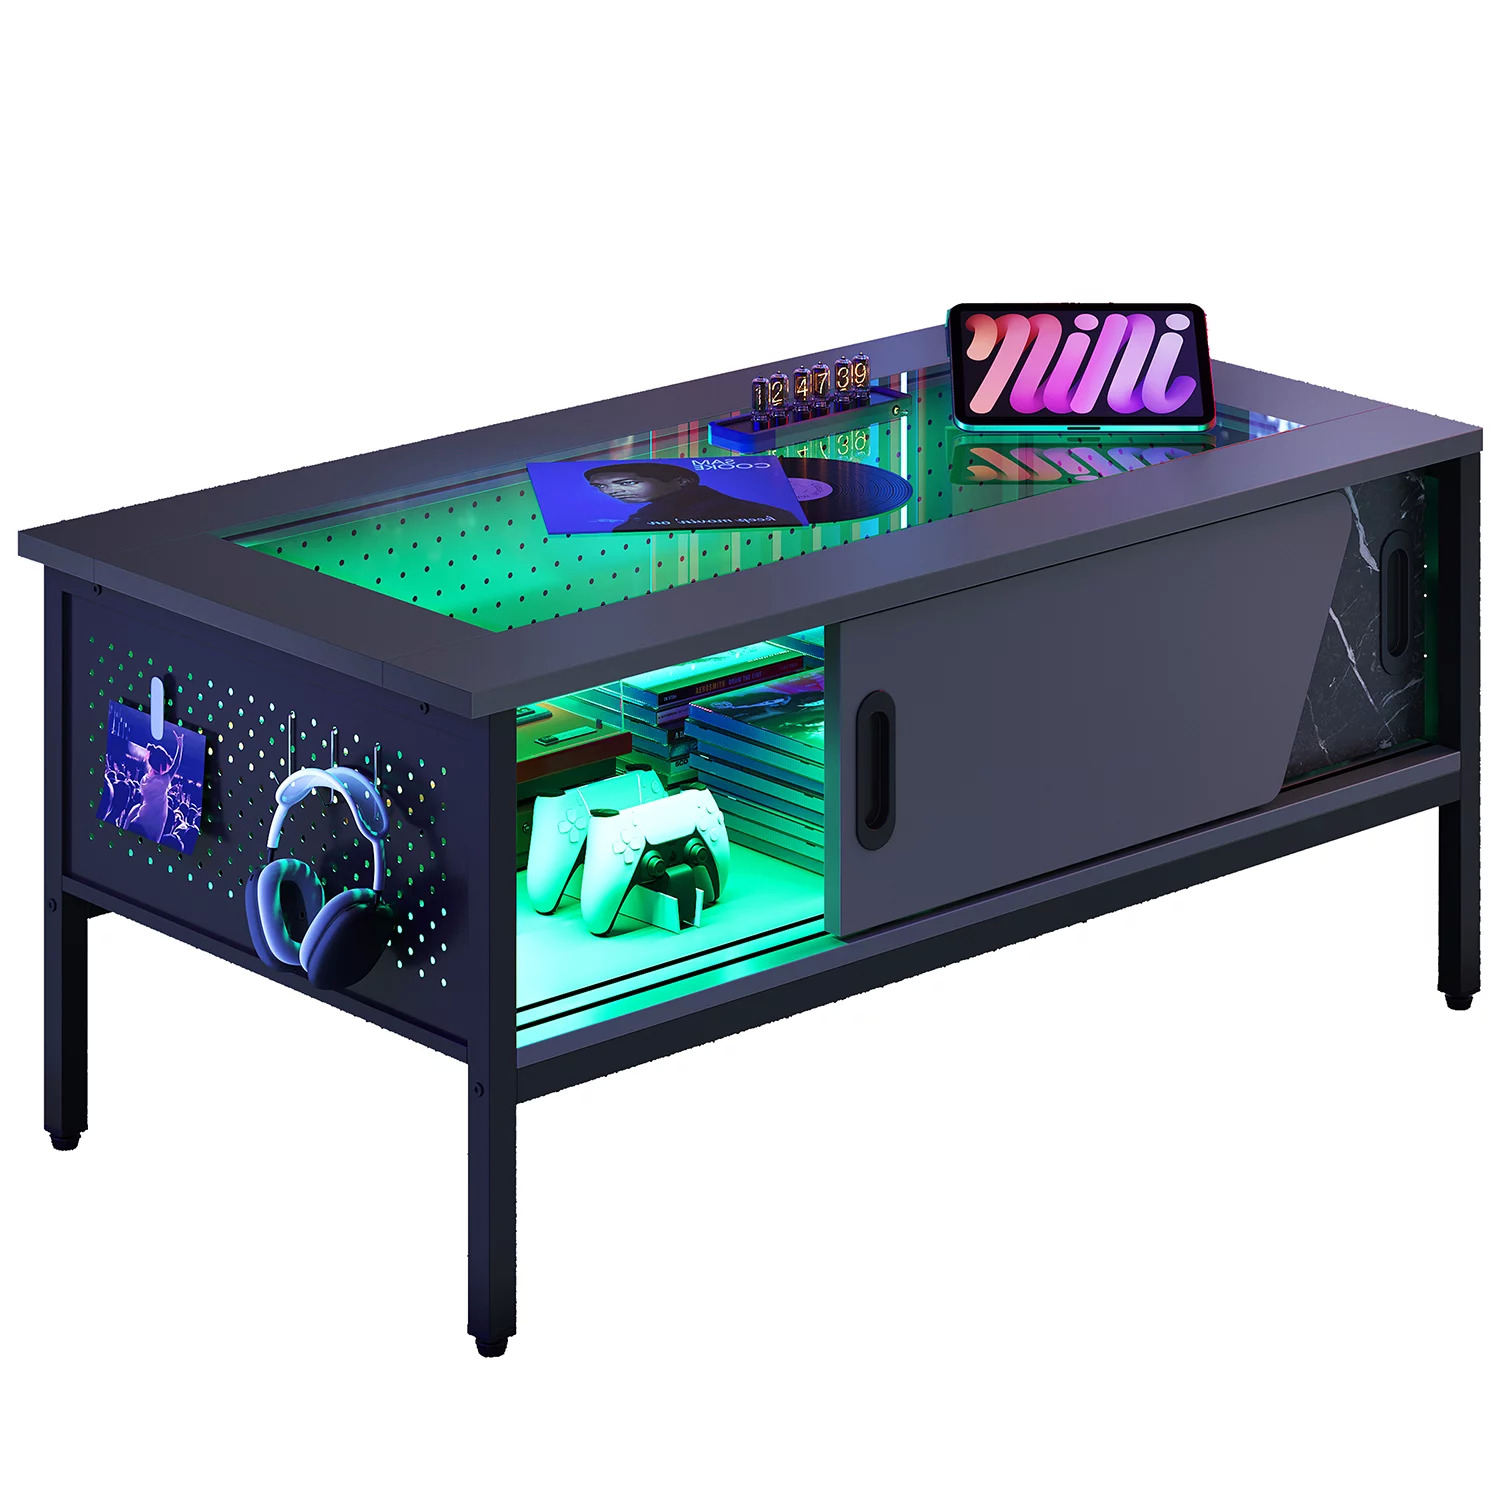 Bestier LED Coffee Table with Glass Top $43 + Free Shipping